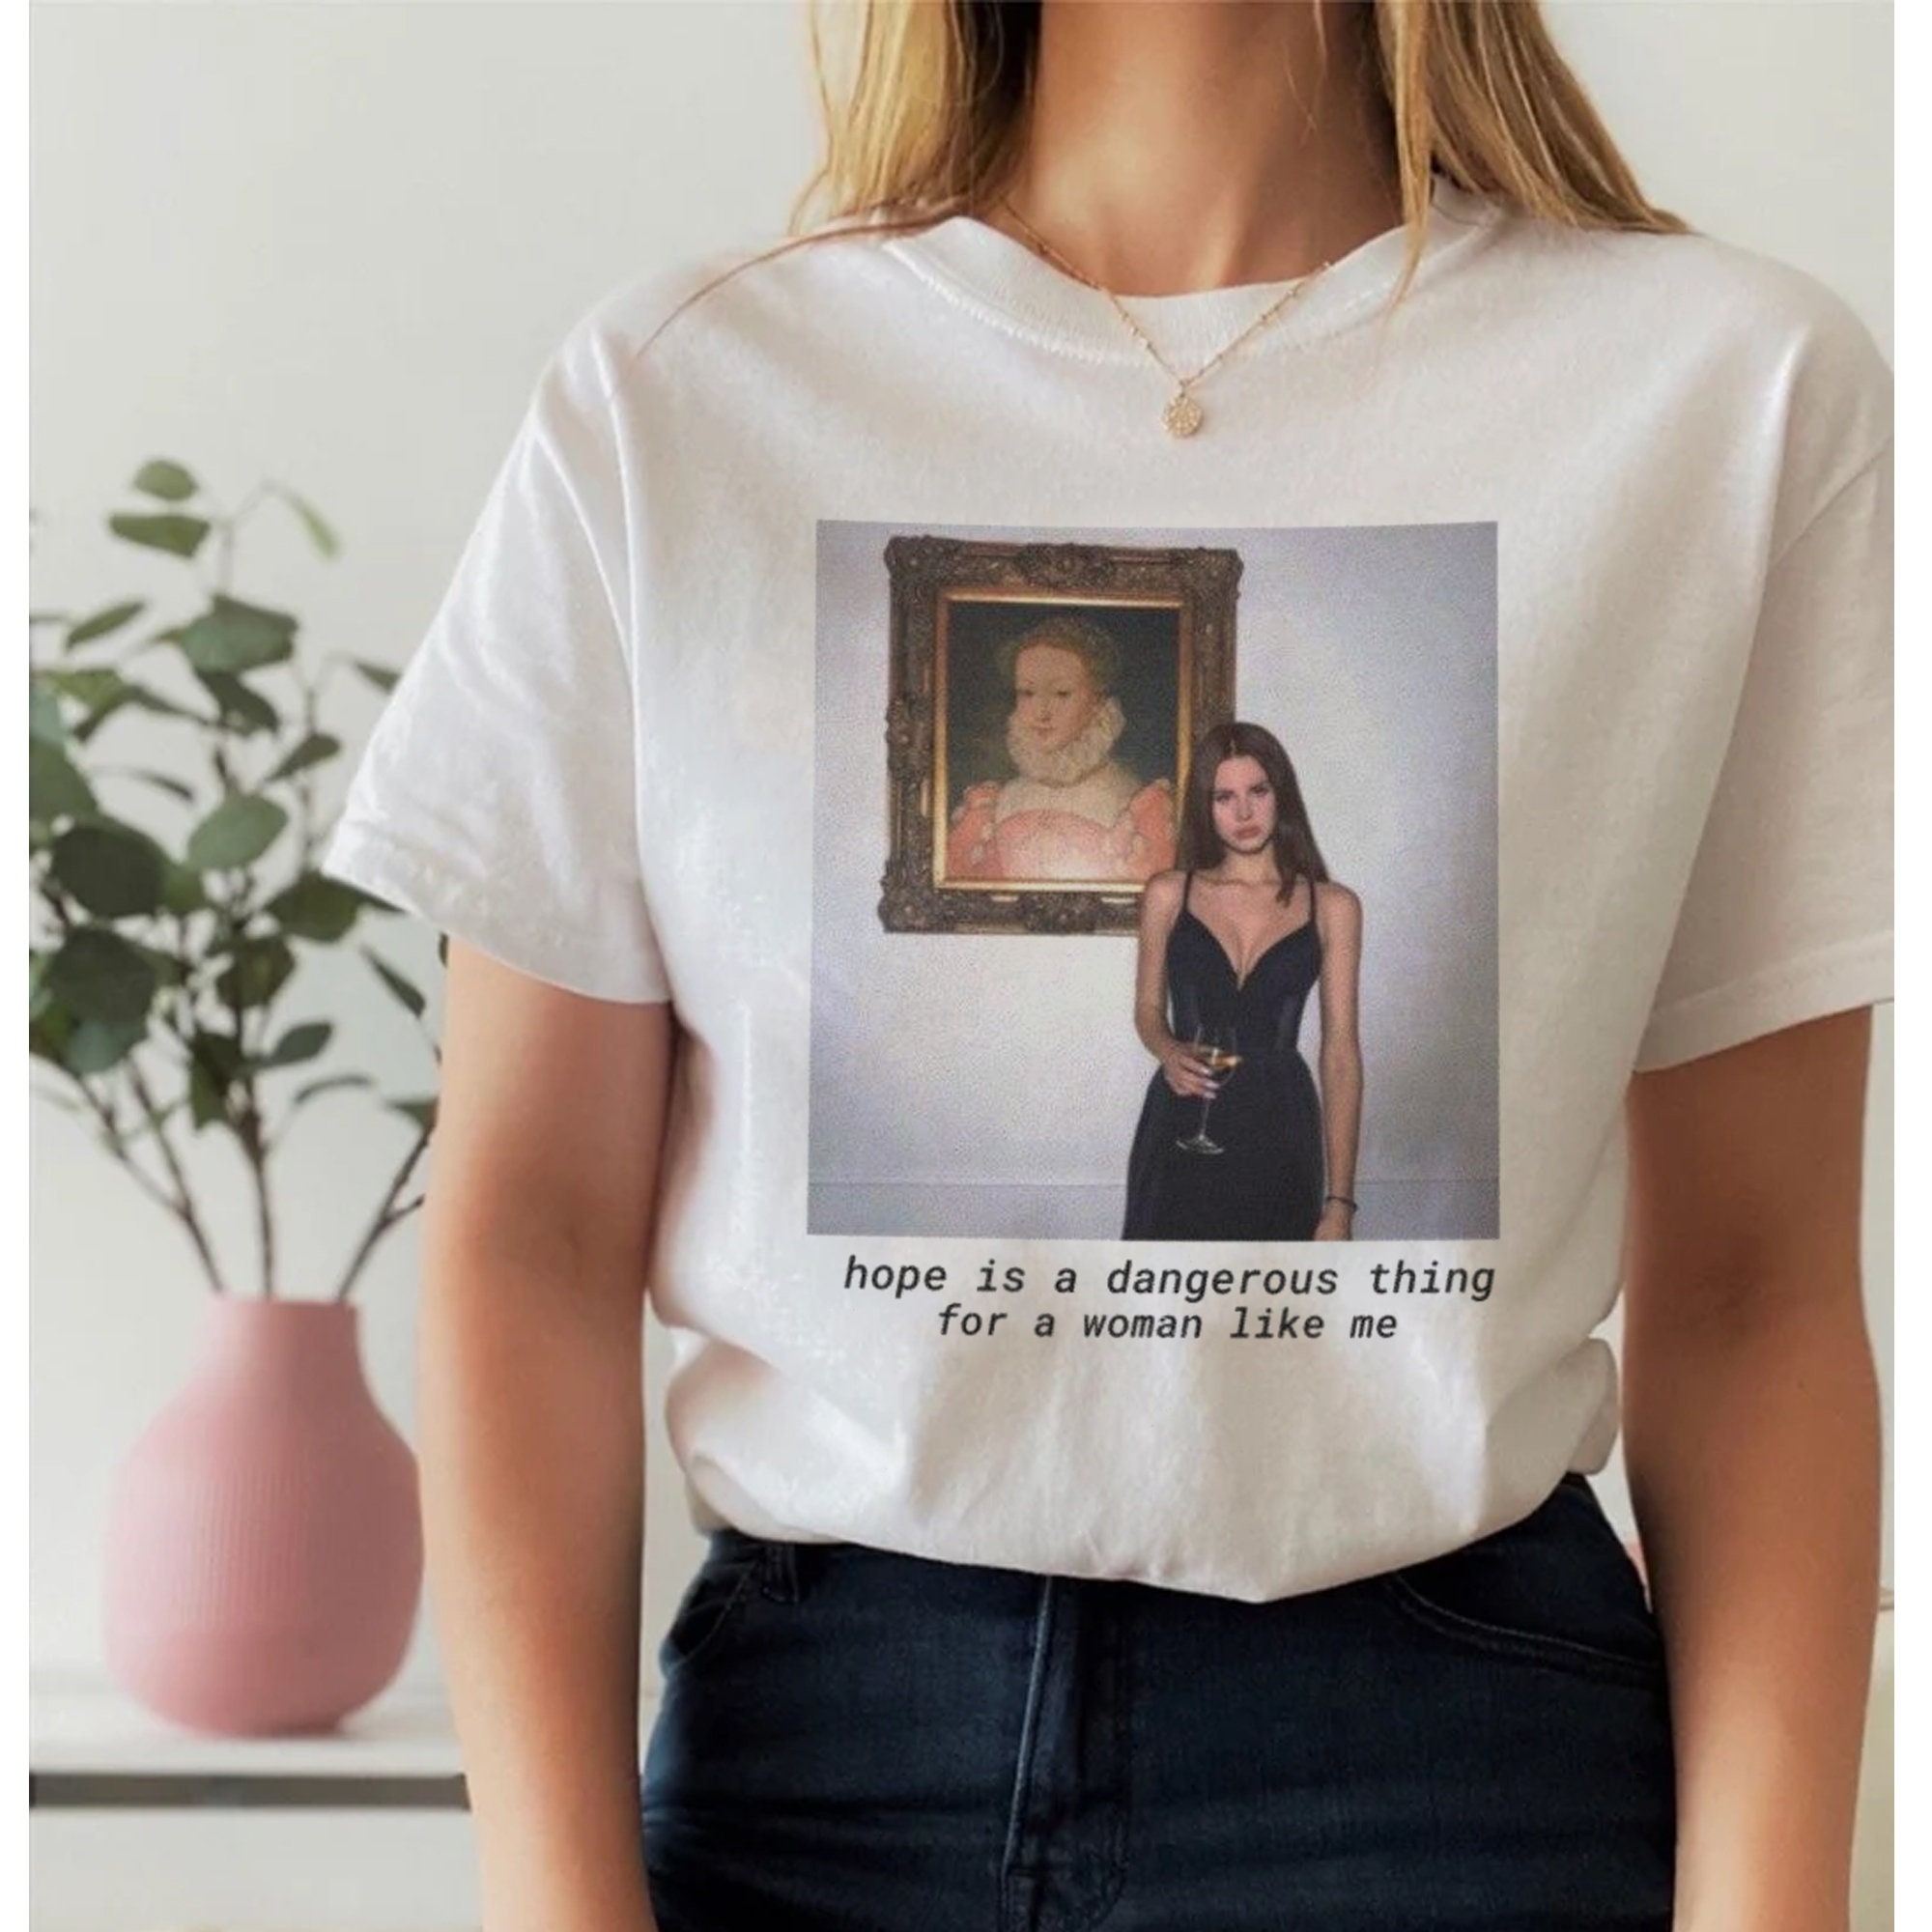 Official Lana Del Rey Gear: Elevate Your Style with Official Merch